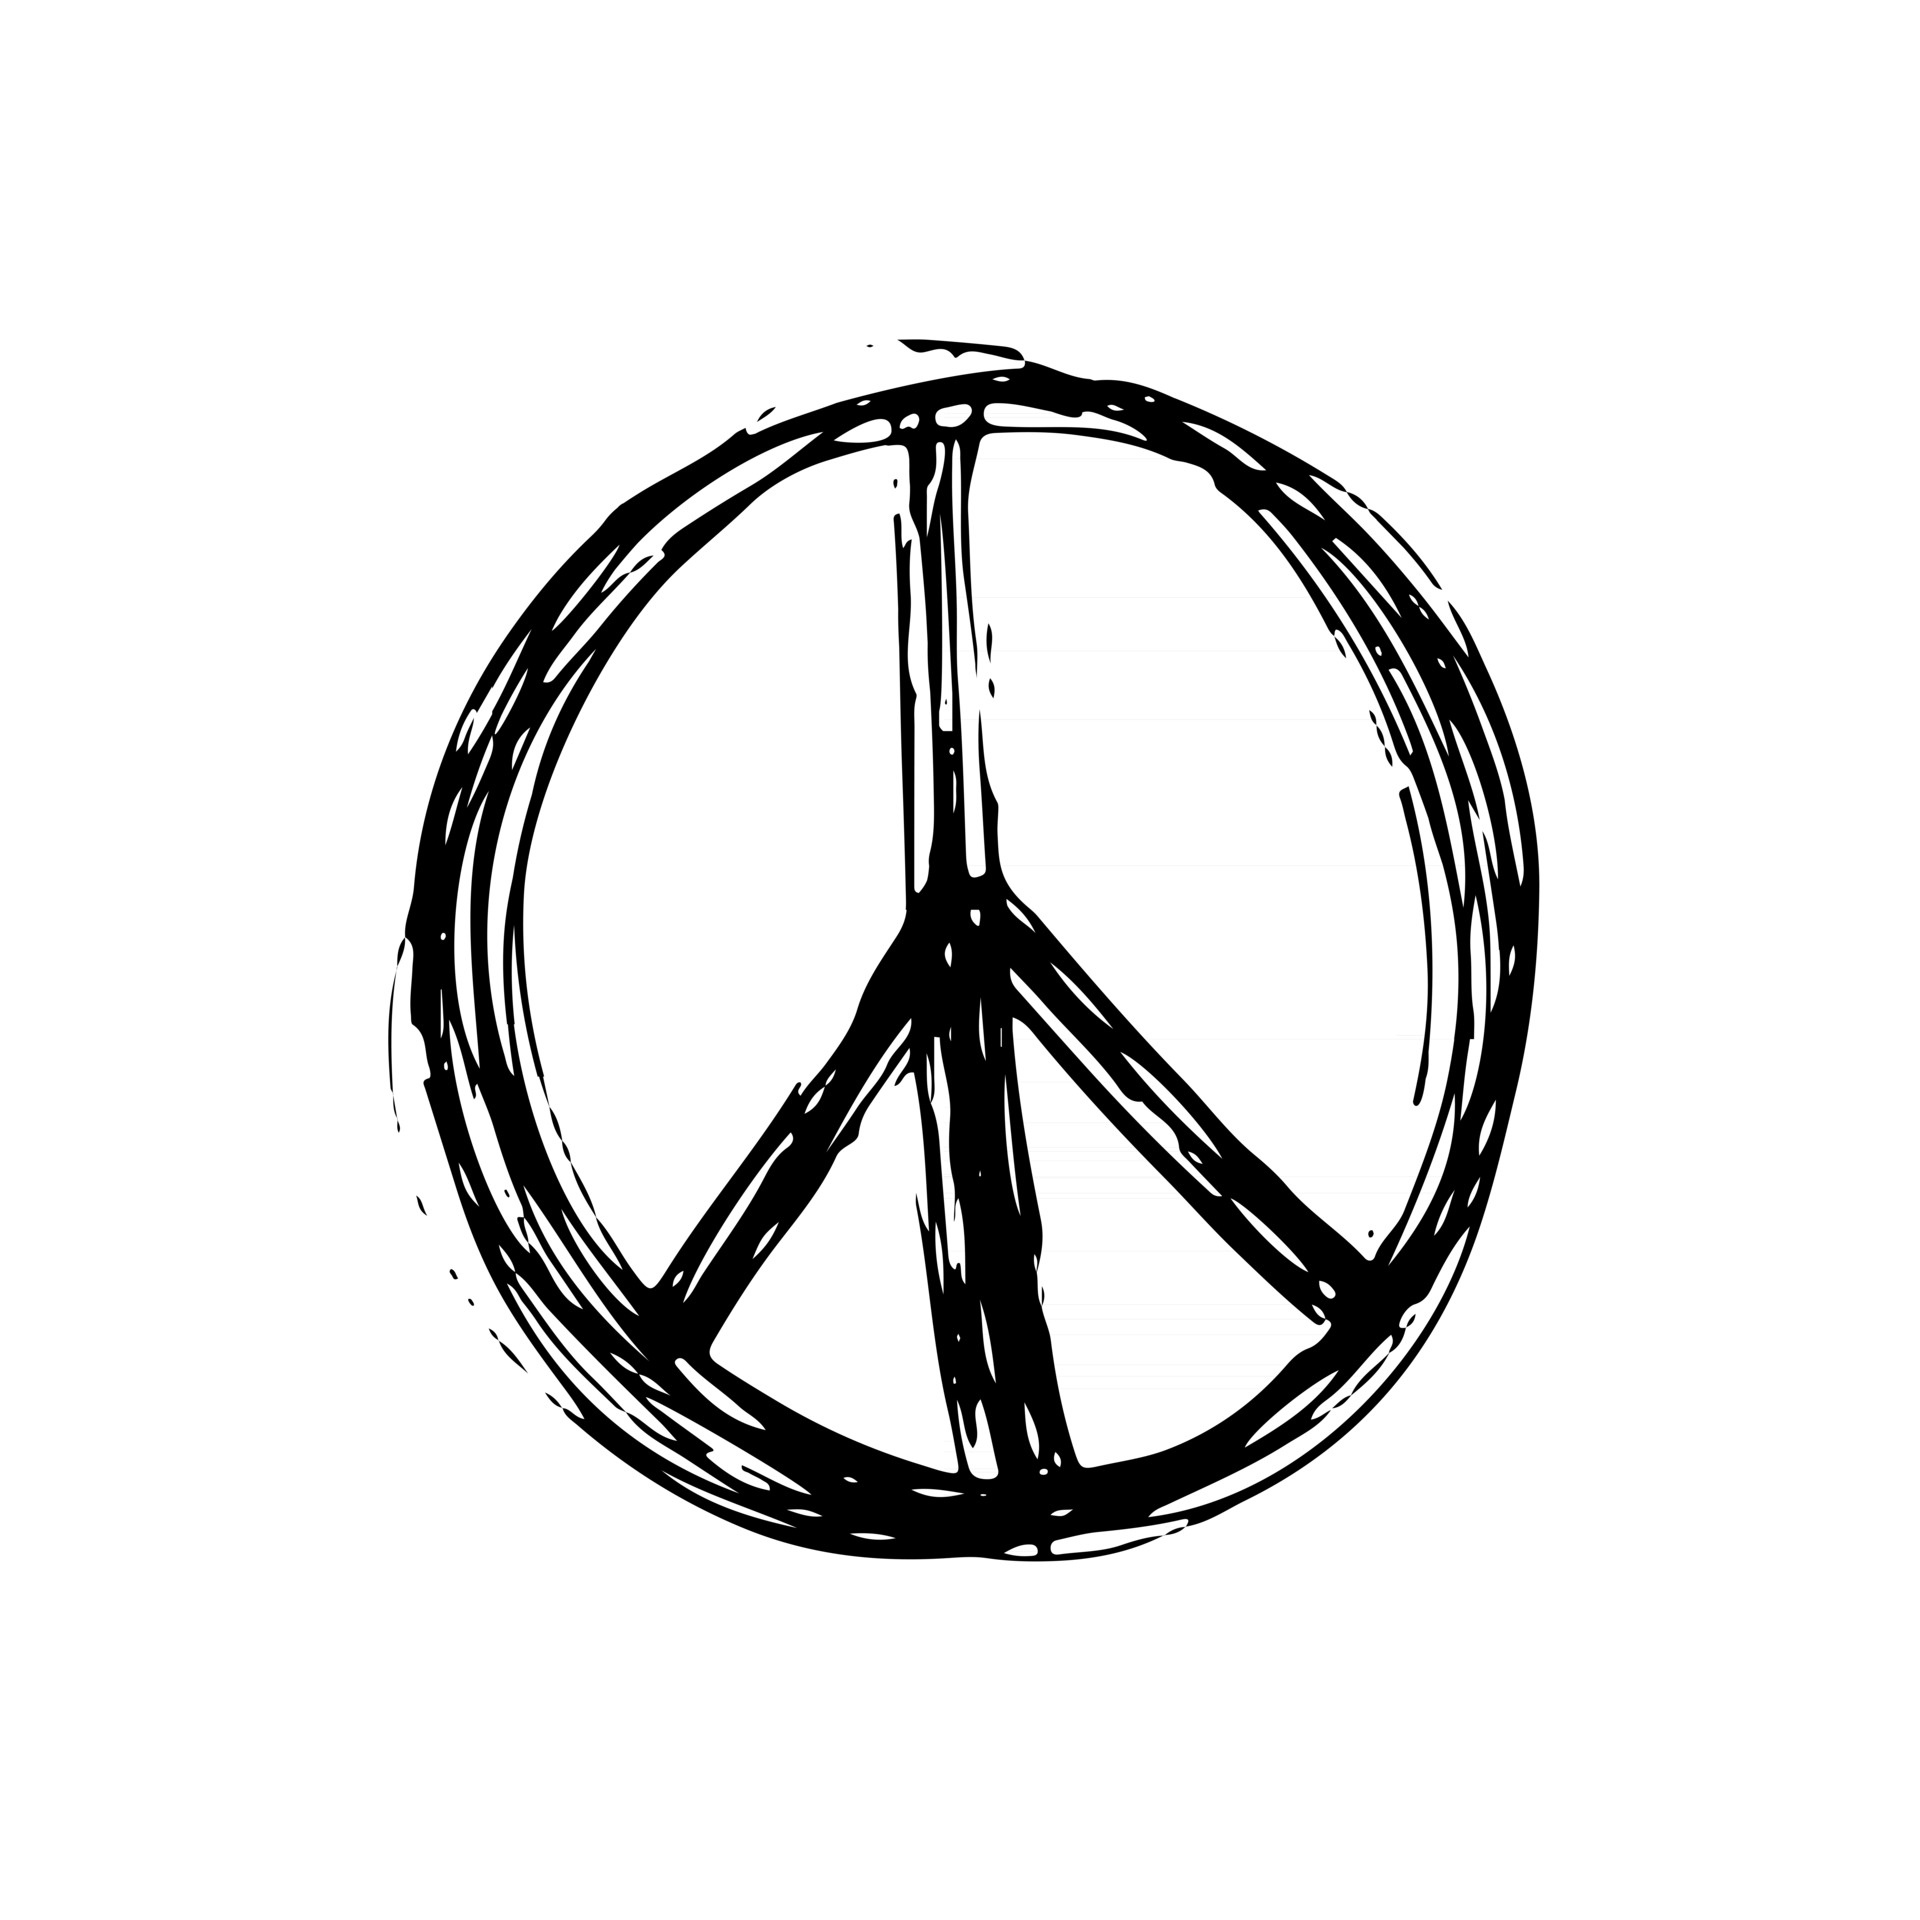 HD wallpaper, Phone Hd Pacifist Background Photo, Hand Drawn Grunge, Hippie Sign, 1920X1920 Hd Phone, Pacifist Symbol, Peaceful Expression